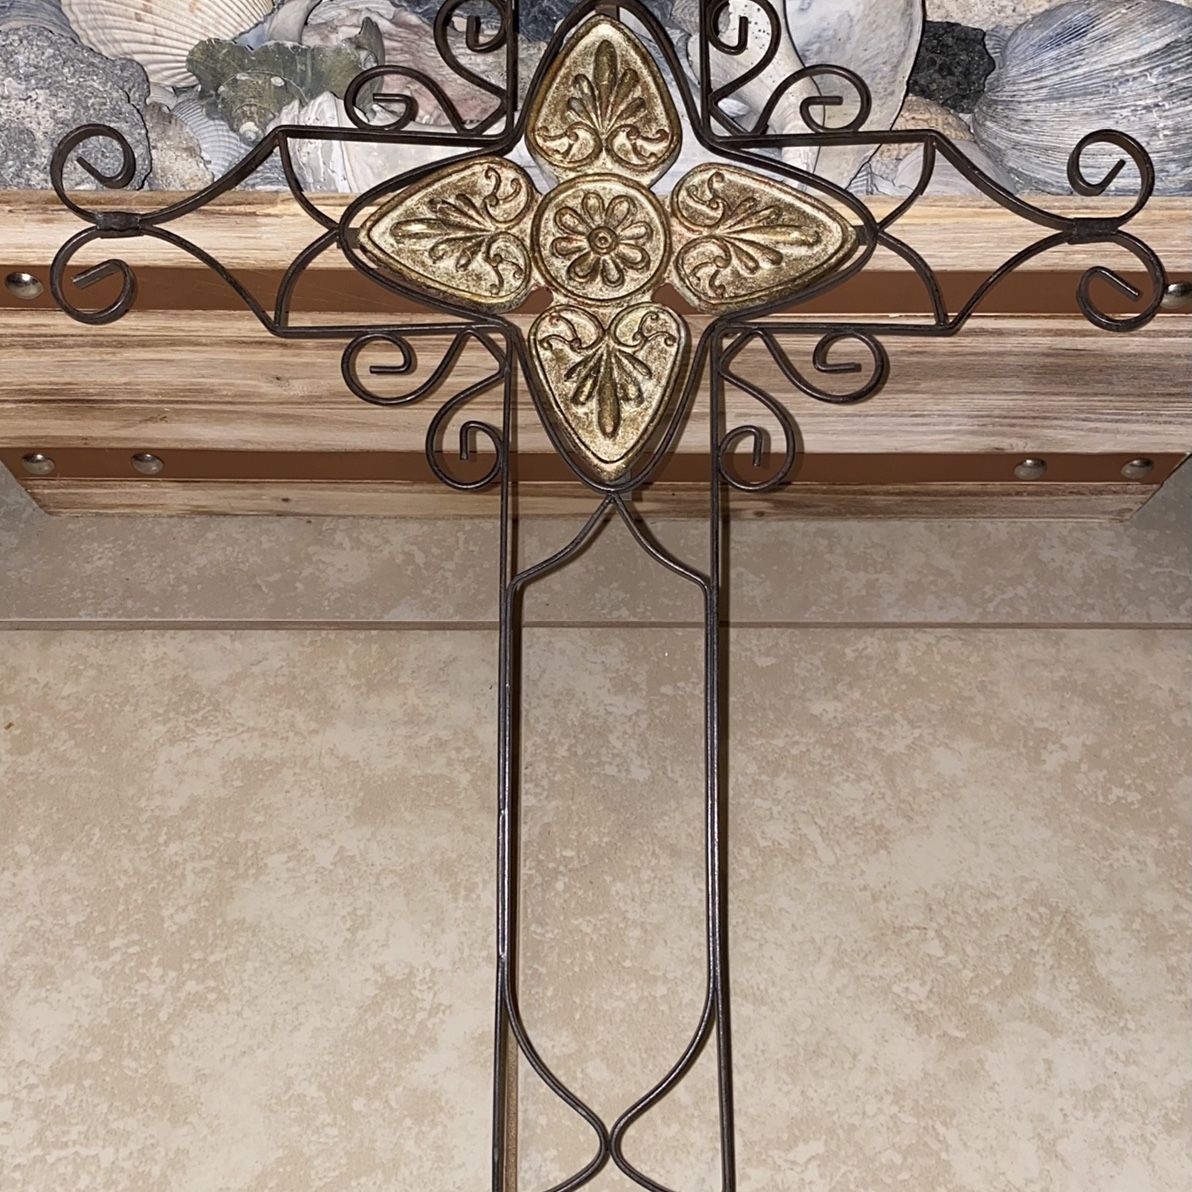 Decorative Carved Cross Dark Finish For Wall Hanging It’s approximately 23”L